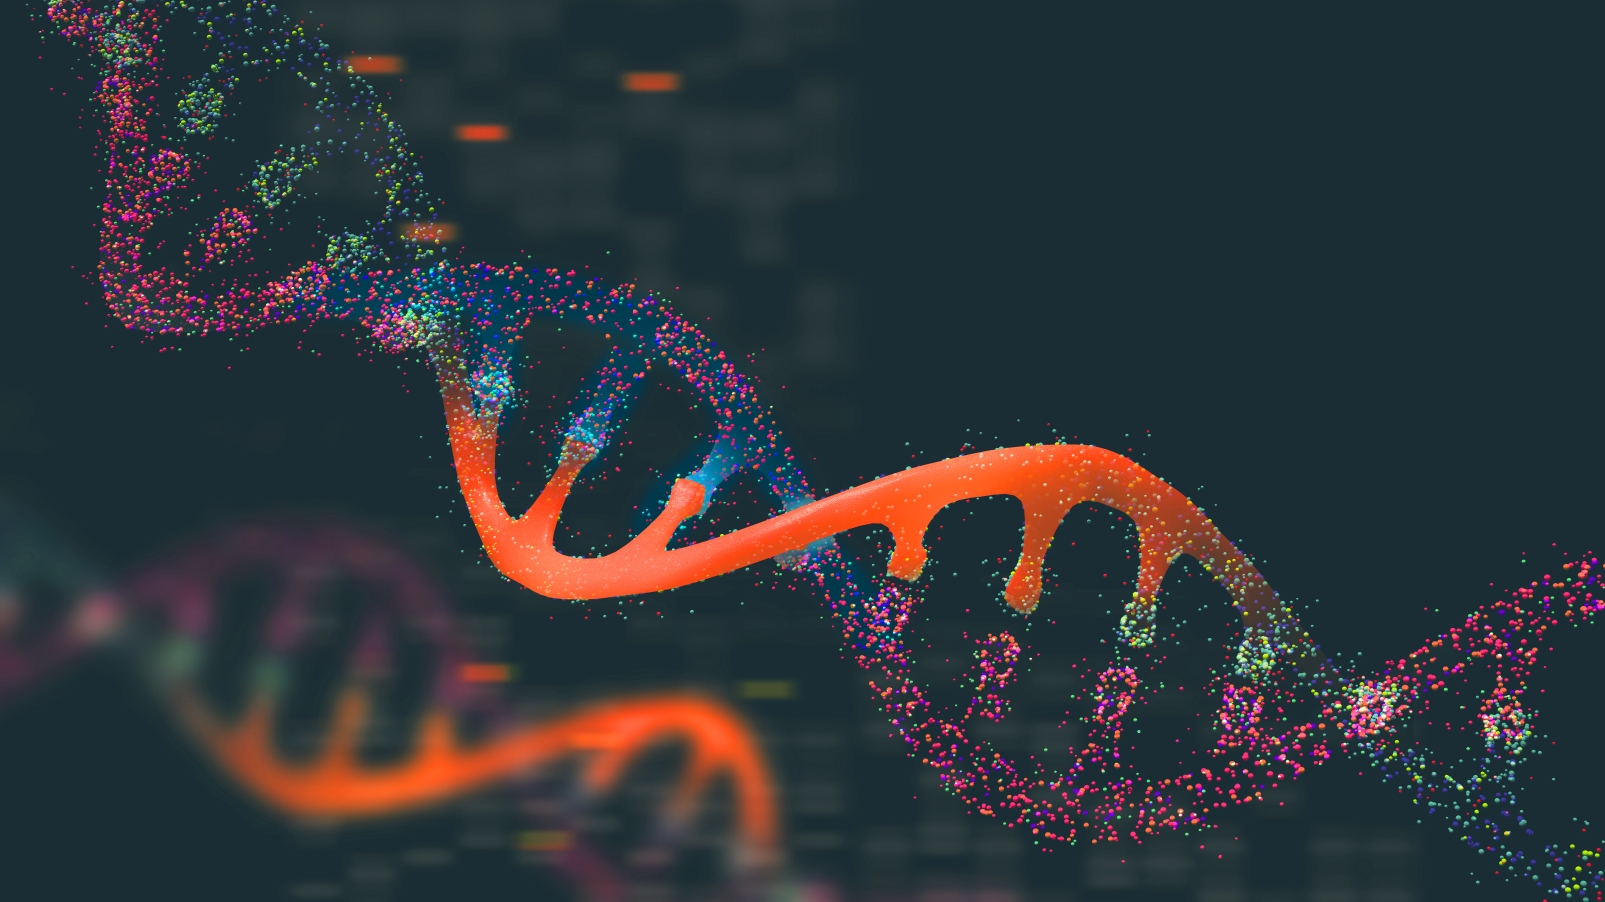 The body's DNA damage response is key in maintaining genome stability in the face of harmful agents. Photo by Yurchanka Siarhei via shutterstock.com